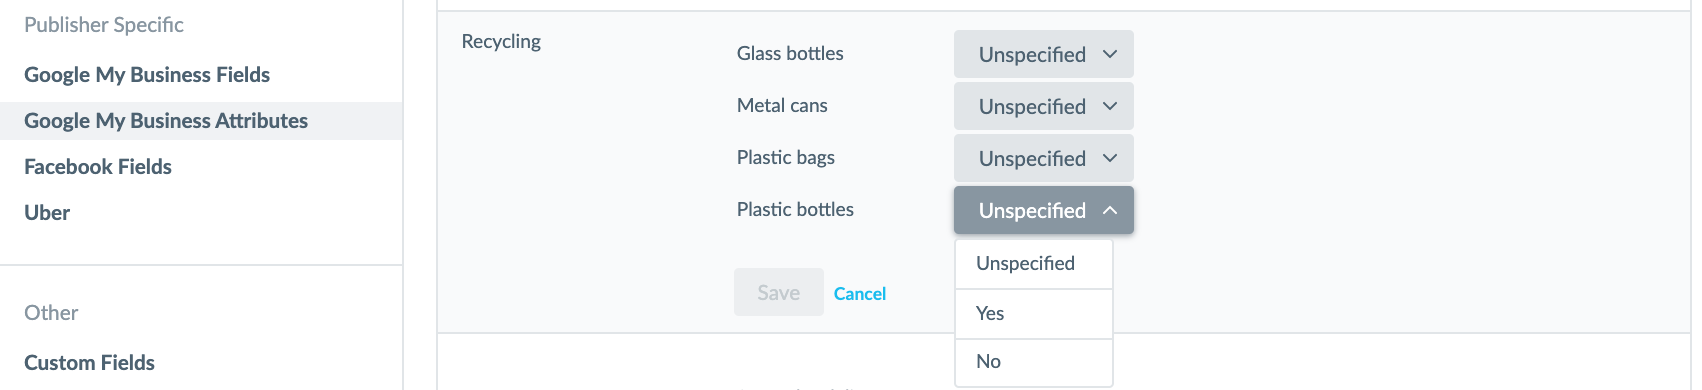 Google Recycling Attributes